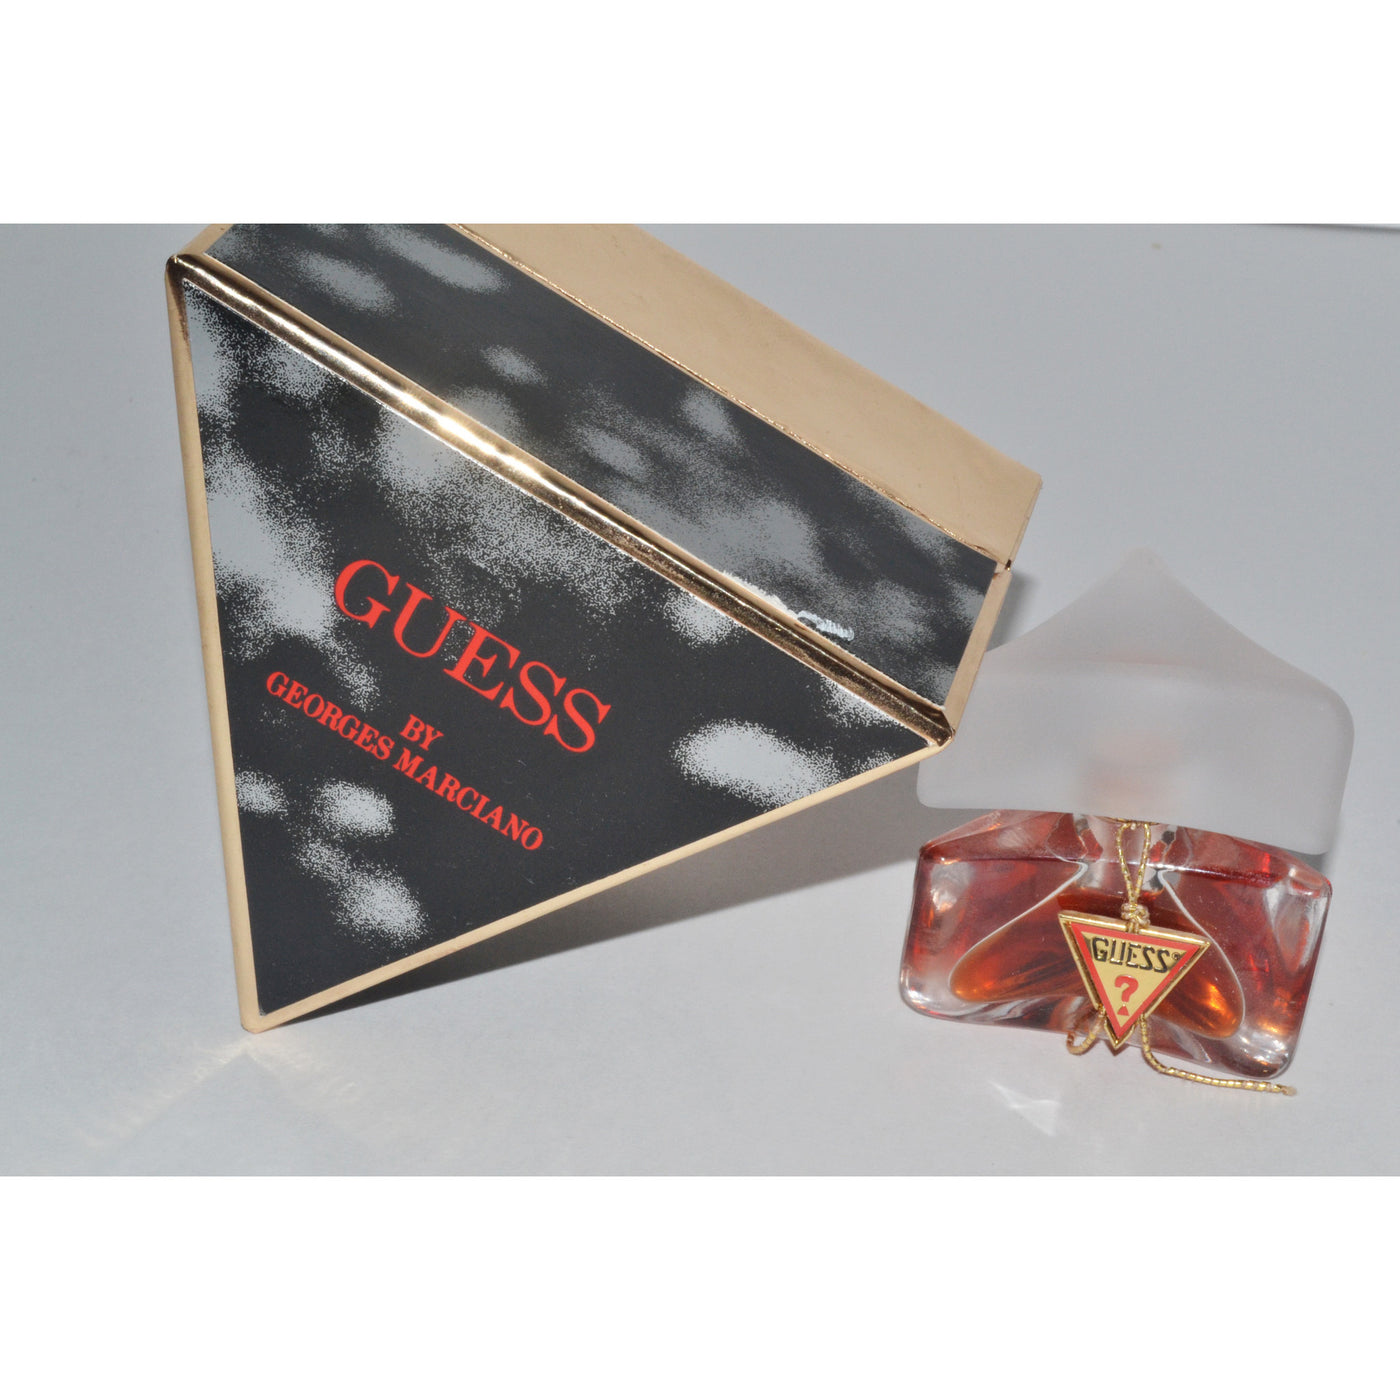 Vintage Guess Perfume By George Marciano